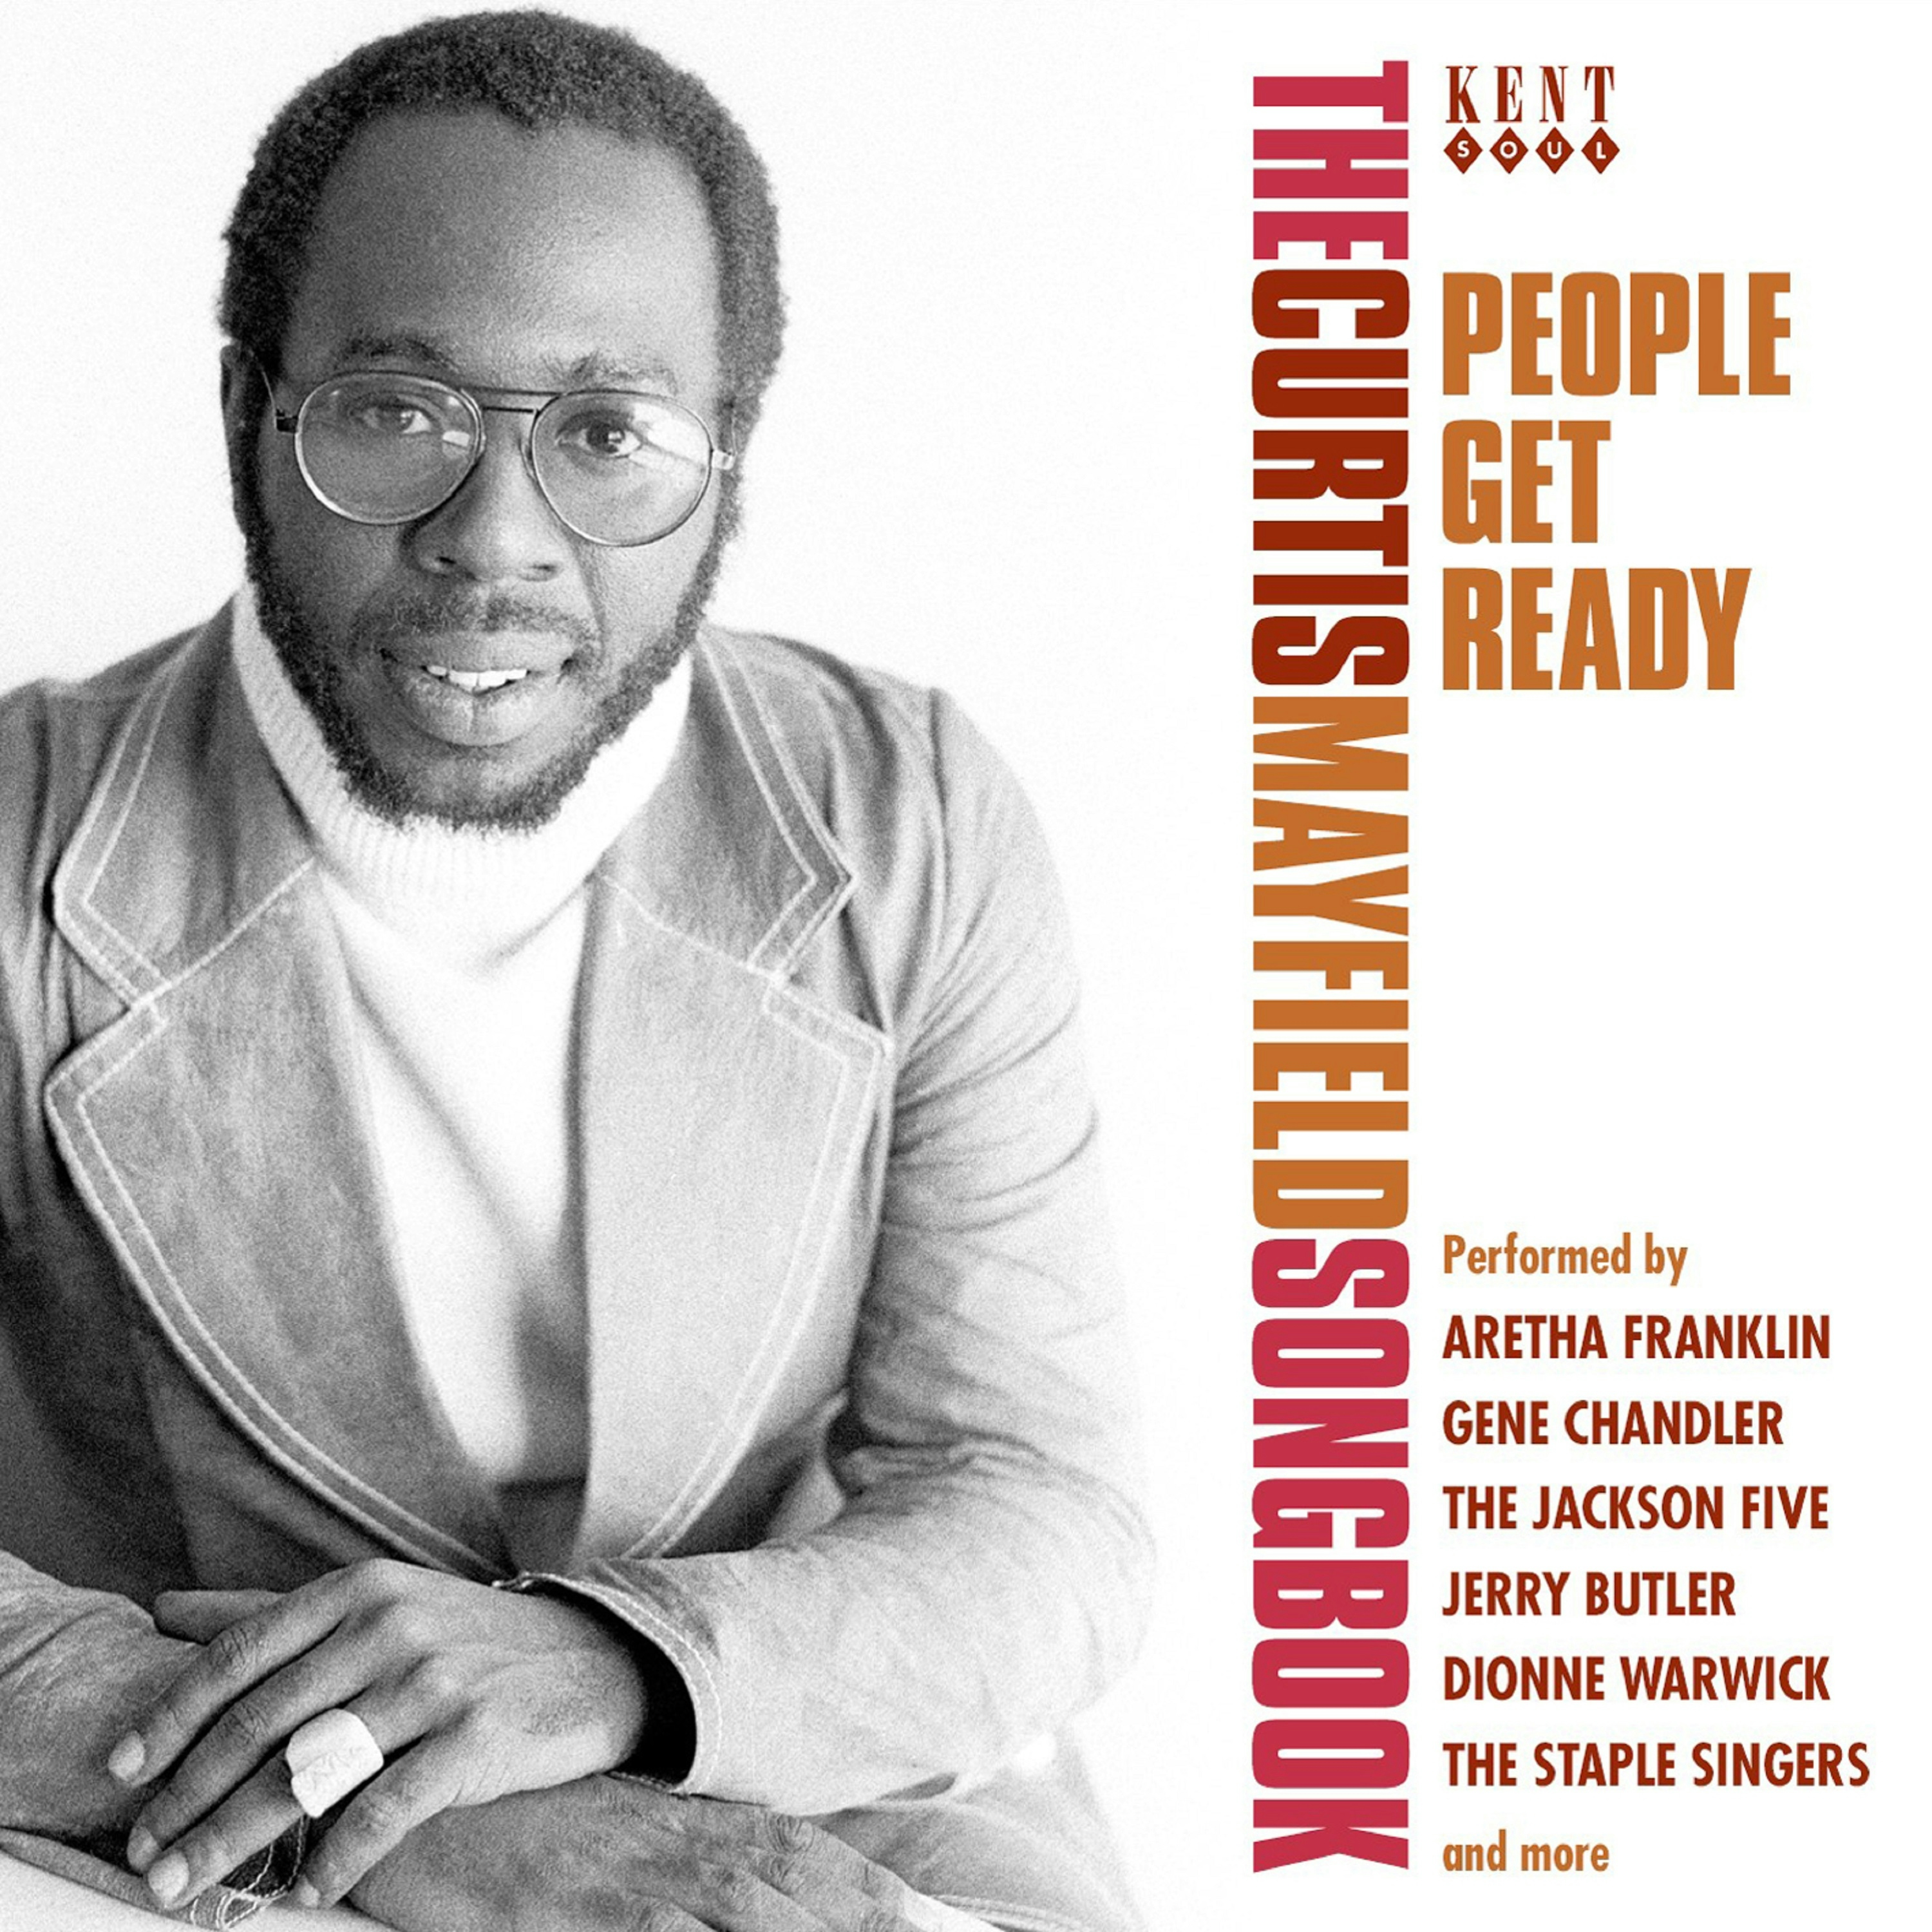 Album artwork for Album artwork for People Get Ready - The Curtis Mayfield Songbook by Various by People Get Ready - The Curtis Mayfield Songbook - Various